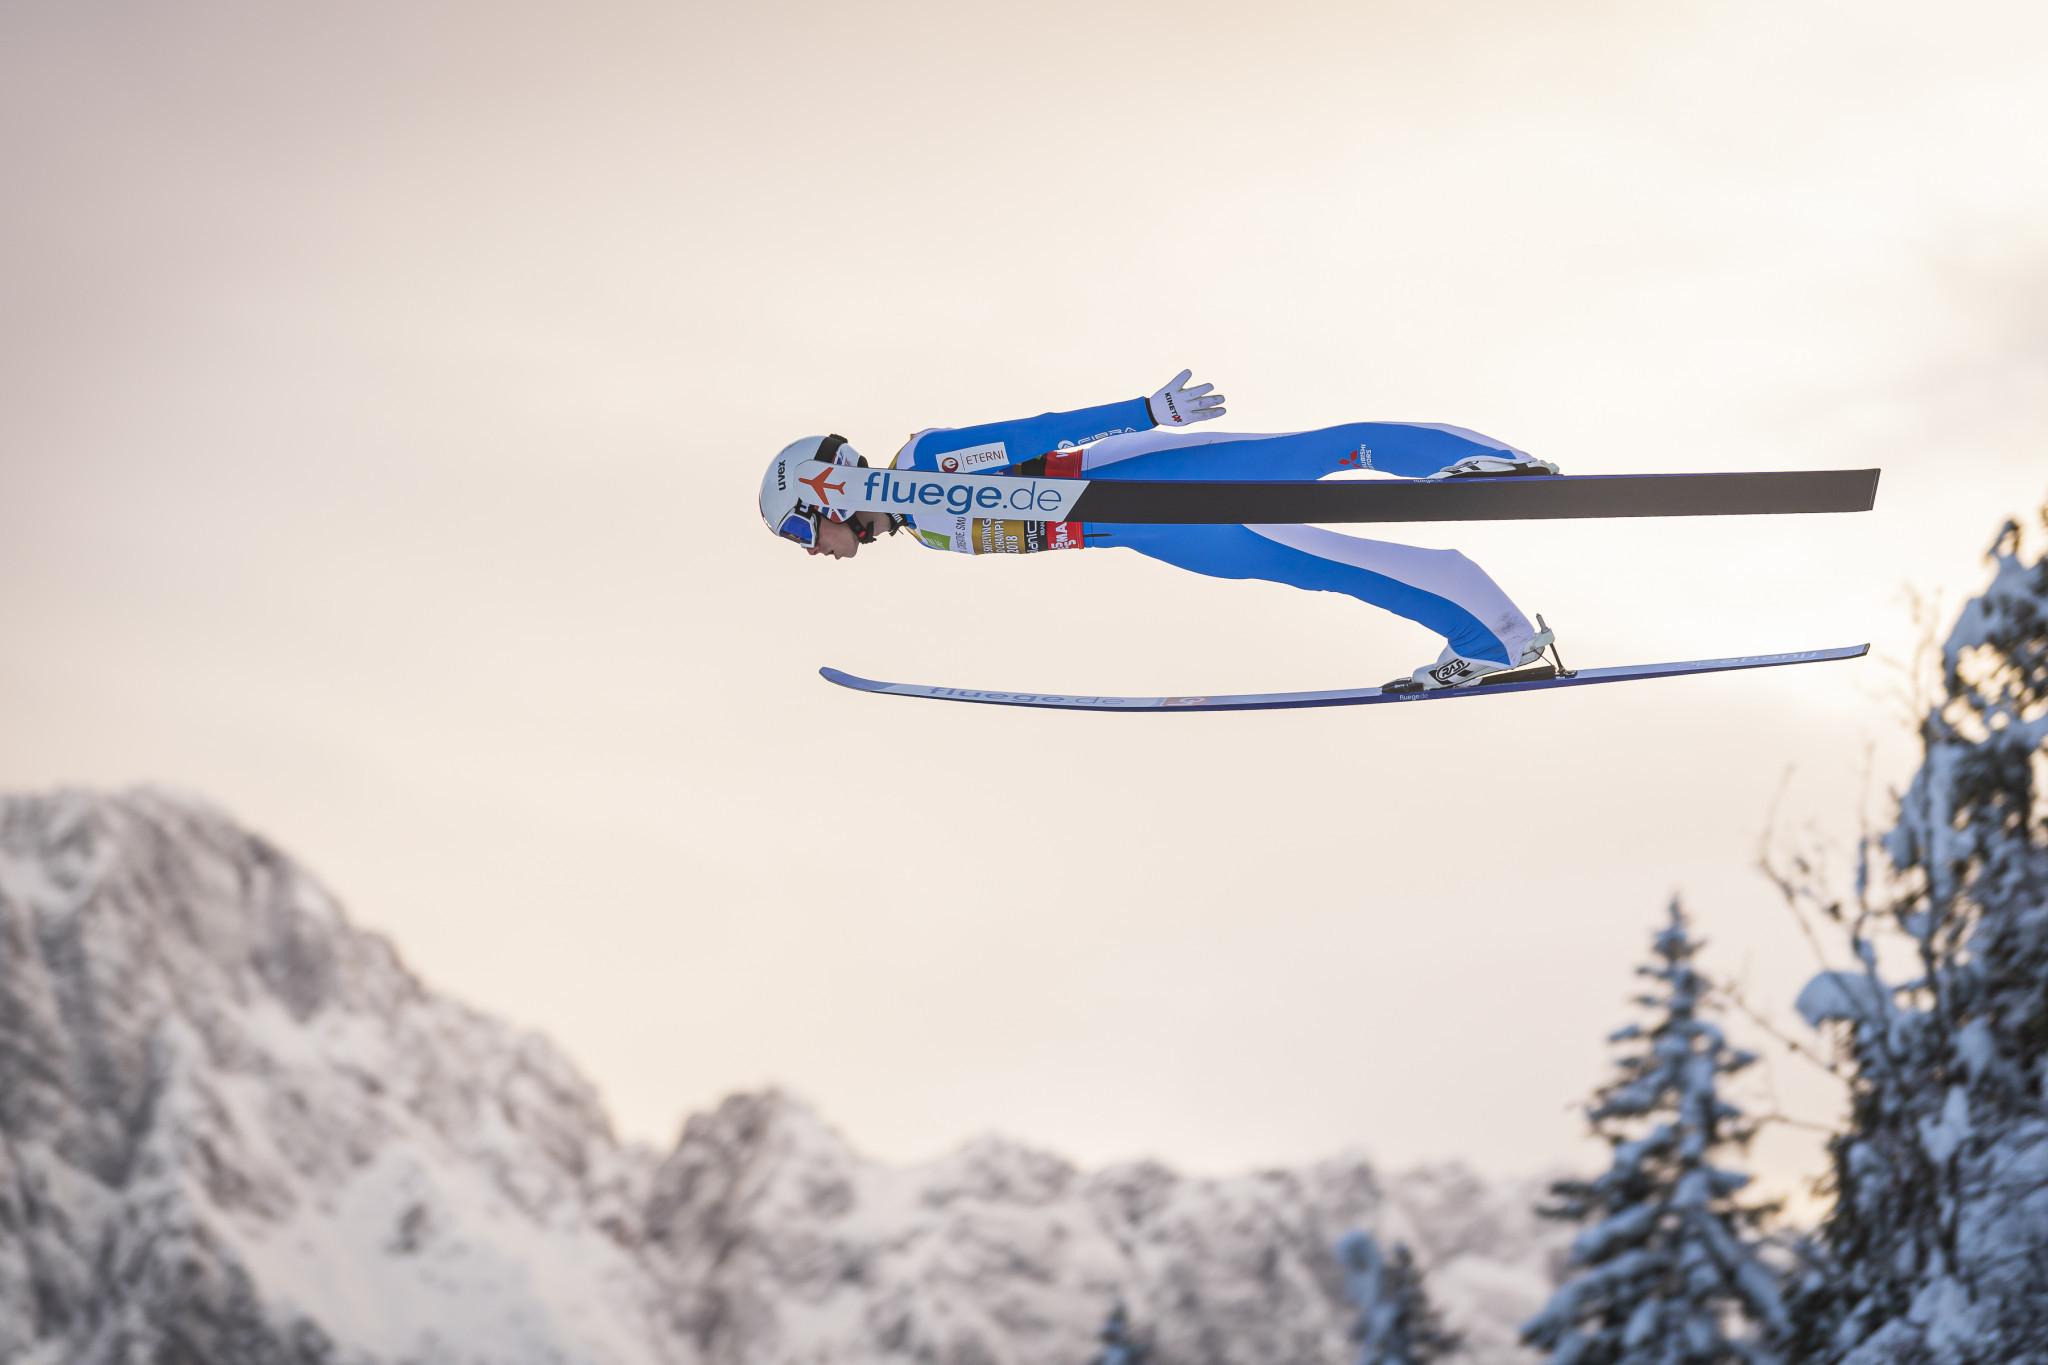 Halvor Egner Granerud of Norway has won the three previous FIS Ski Jumping World Cup events ©Getty Images